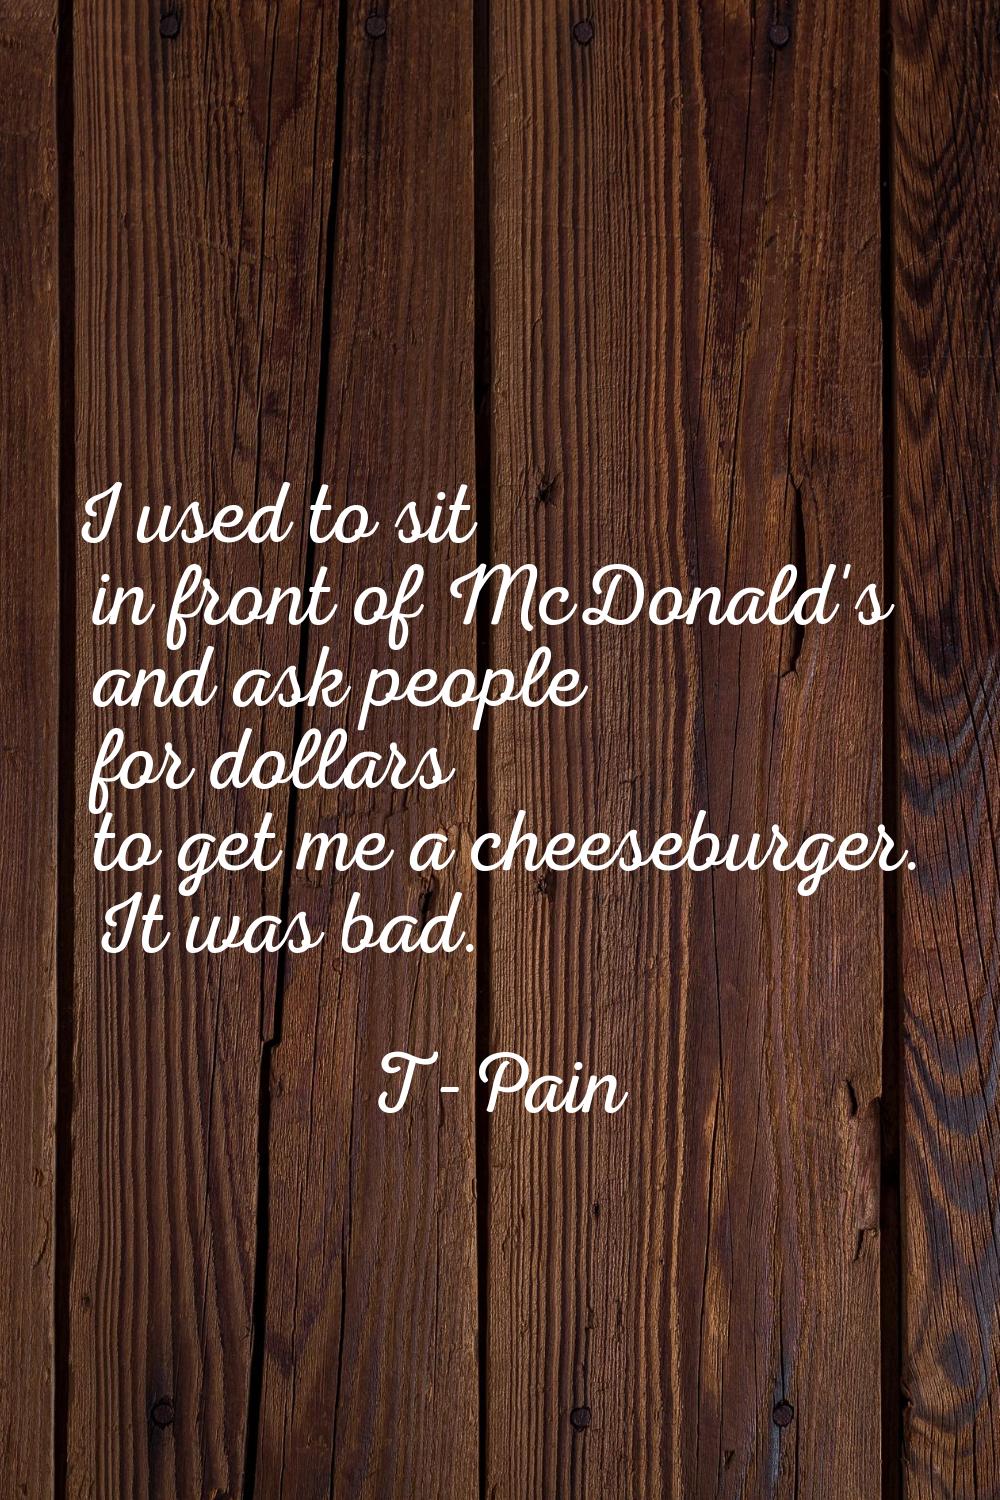 I used to sit in front of McDonald's and ask people for dollars to get me a cheeseburger. It was ba